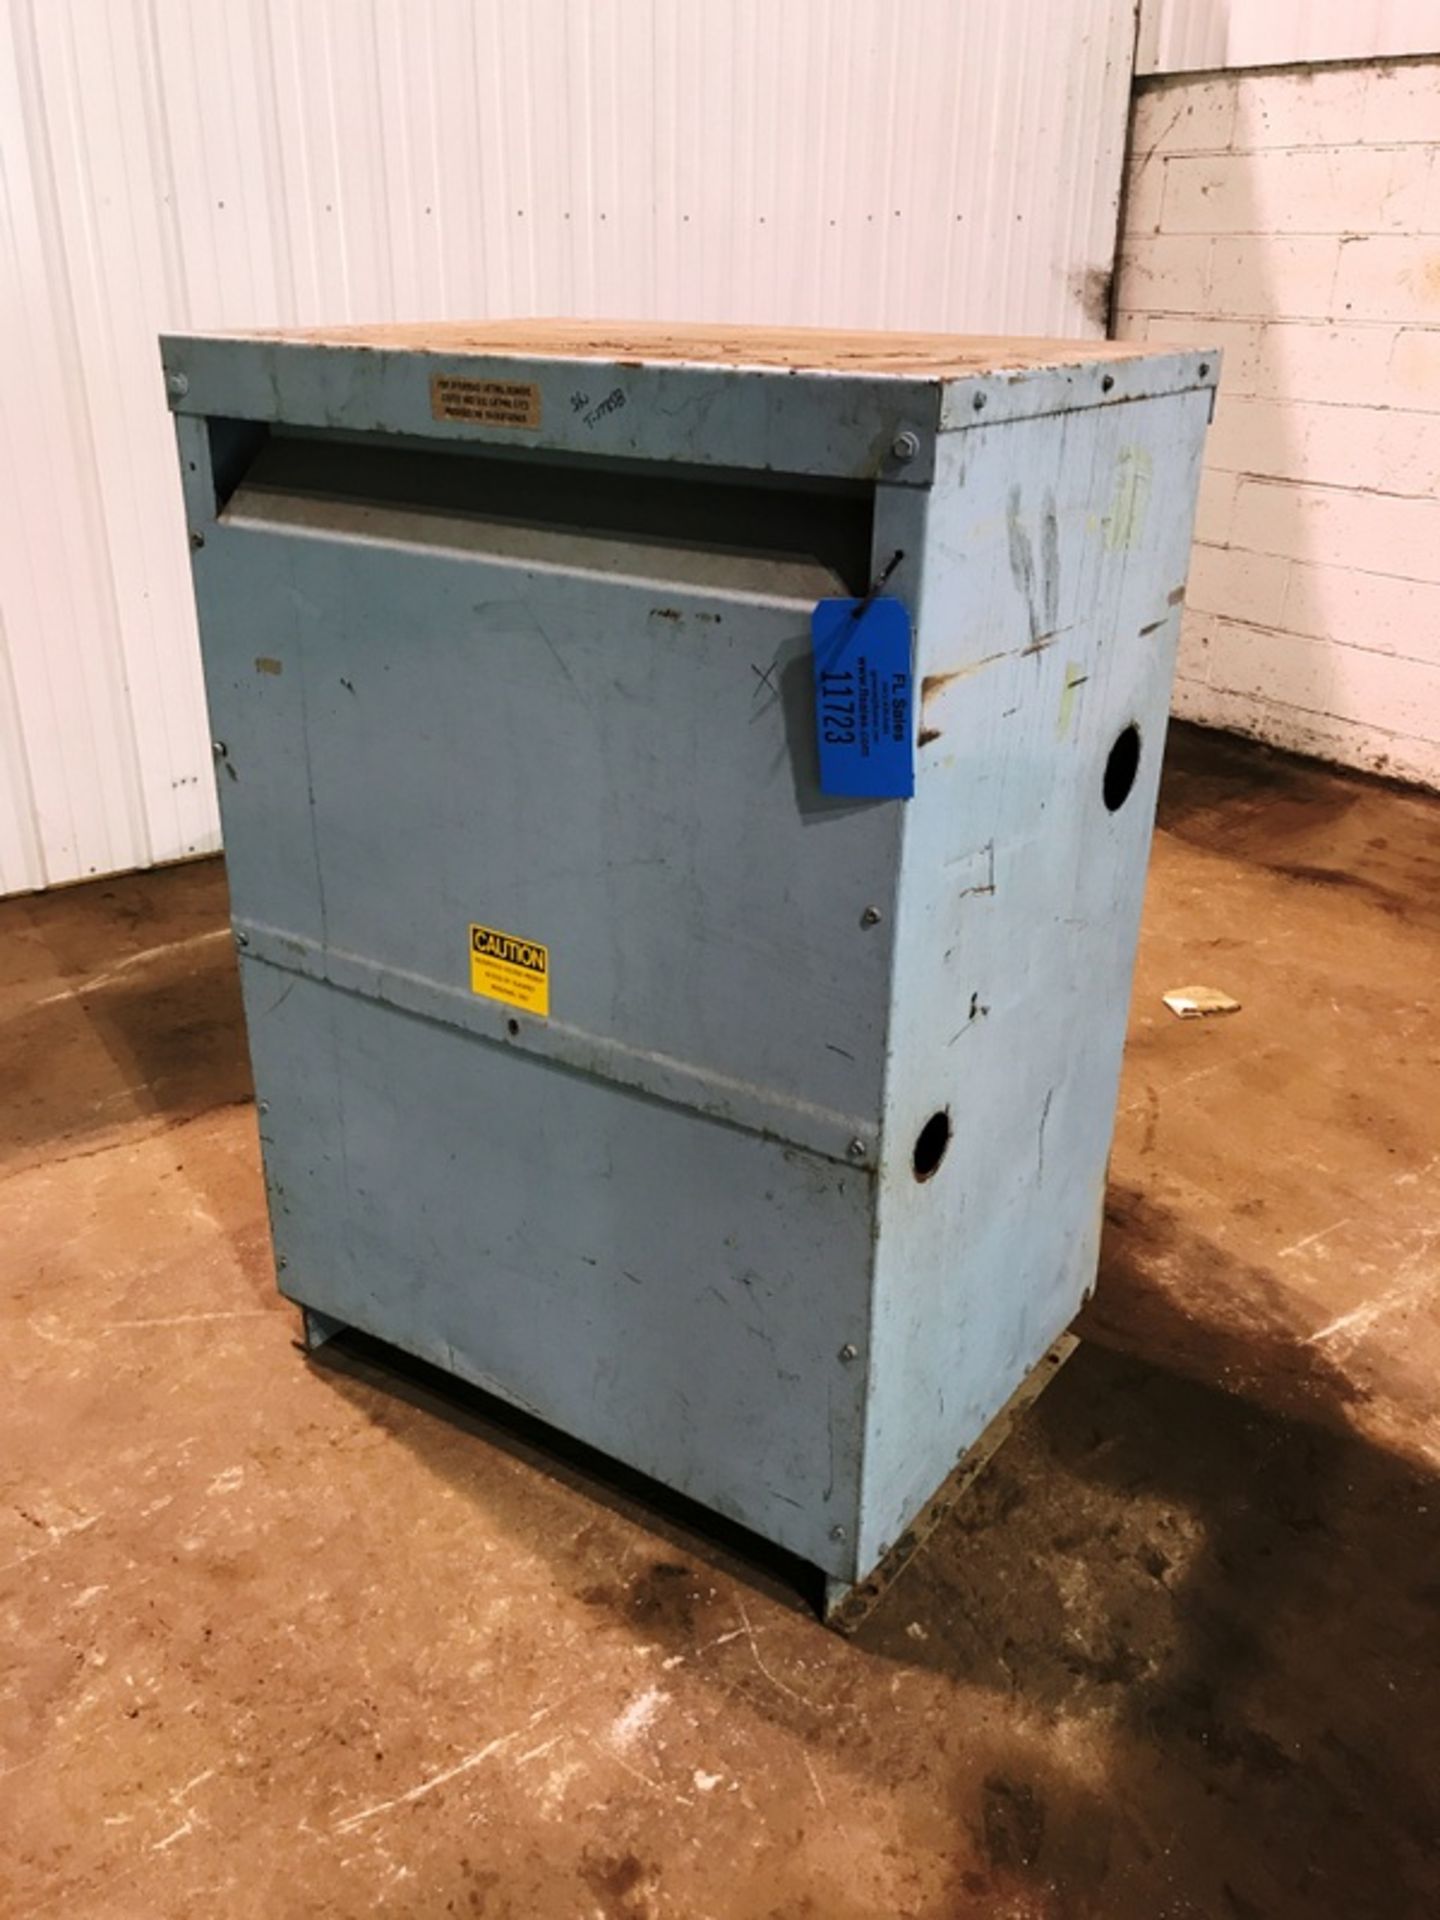 TRANSFORMER 480 TO 120 VOLT 35" X 25" X 49" 475LBS - Image 2 of 3